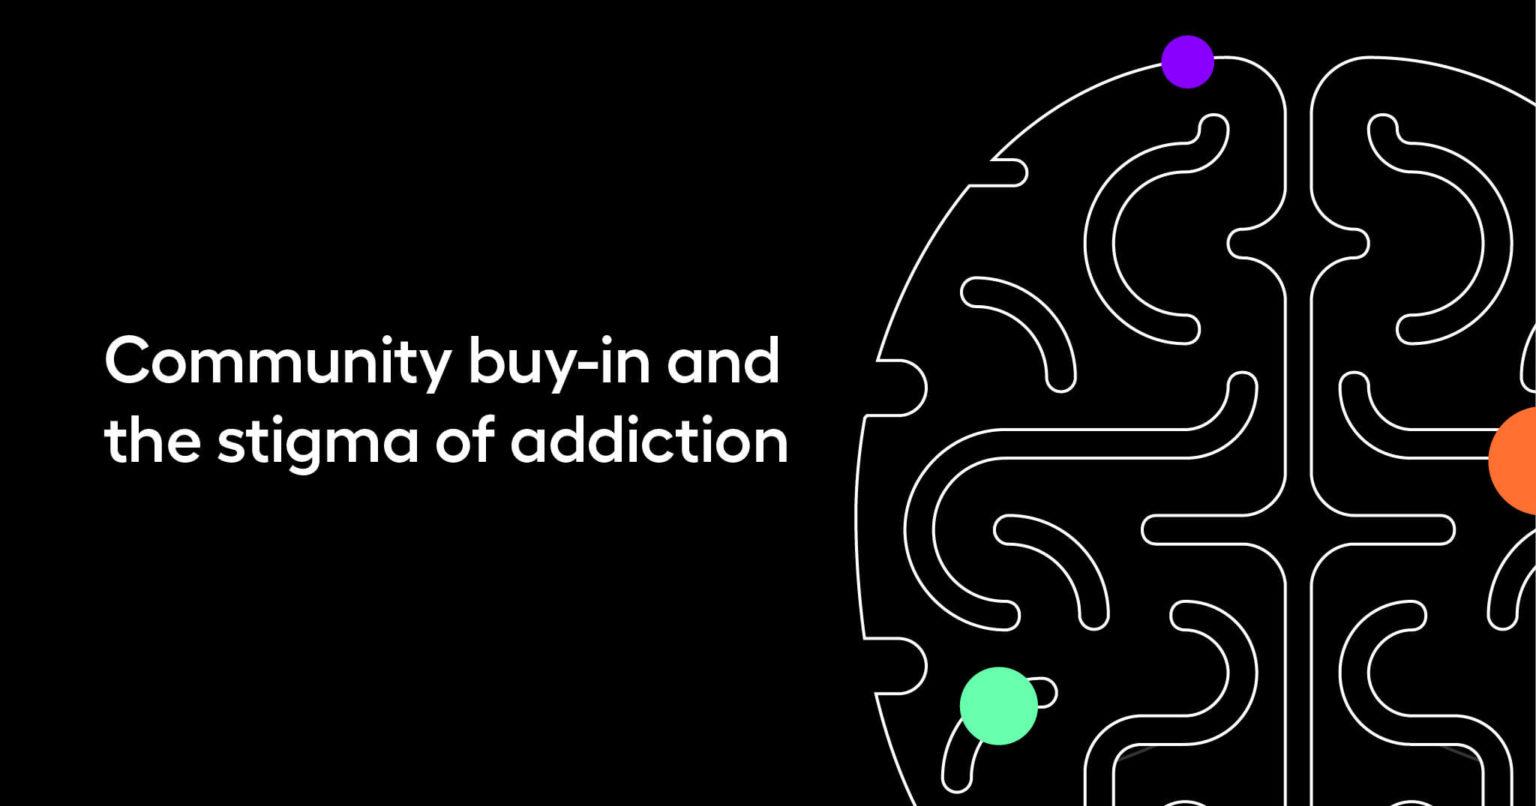 Community buy-in and the stigma of addiction